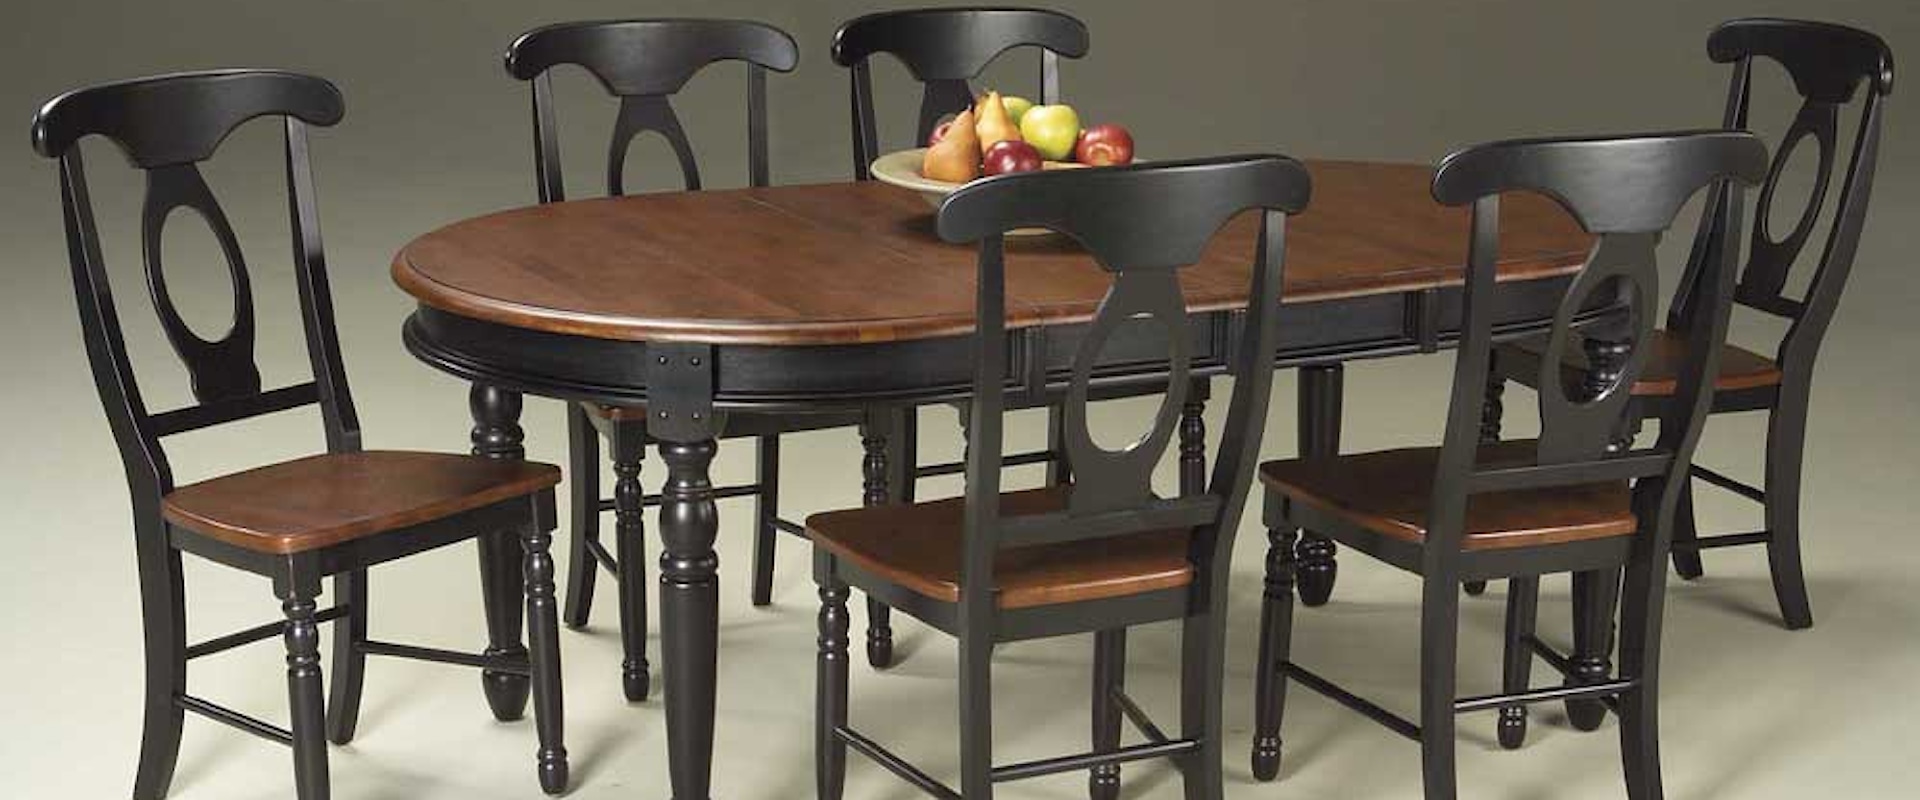 7 Piece Oval Leg Table with Chairs